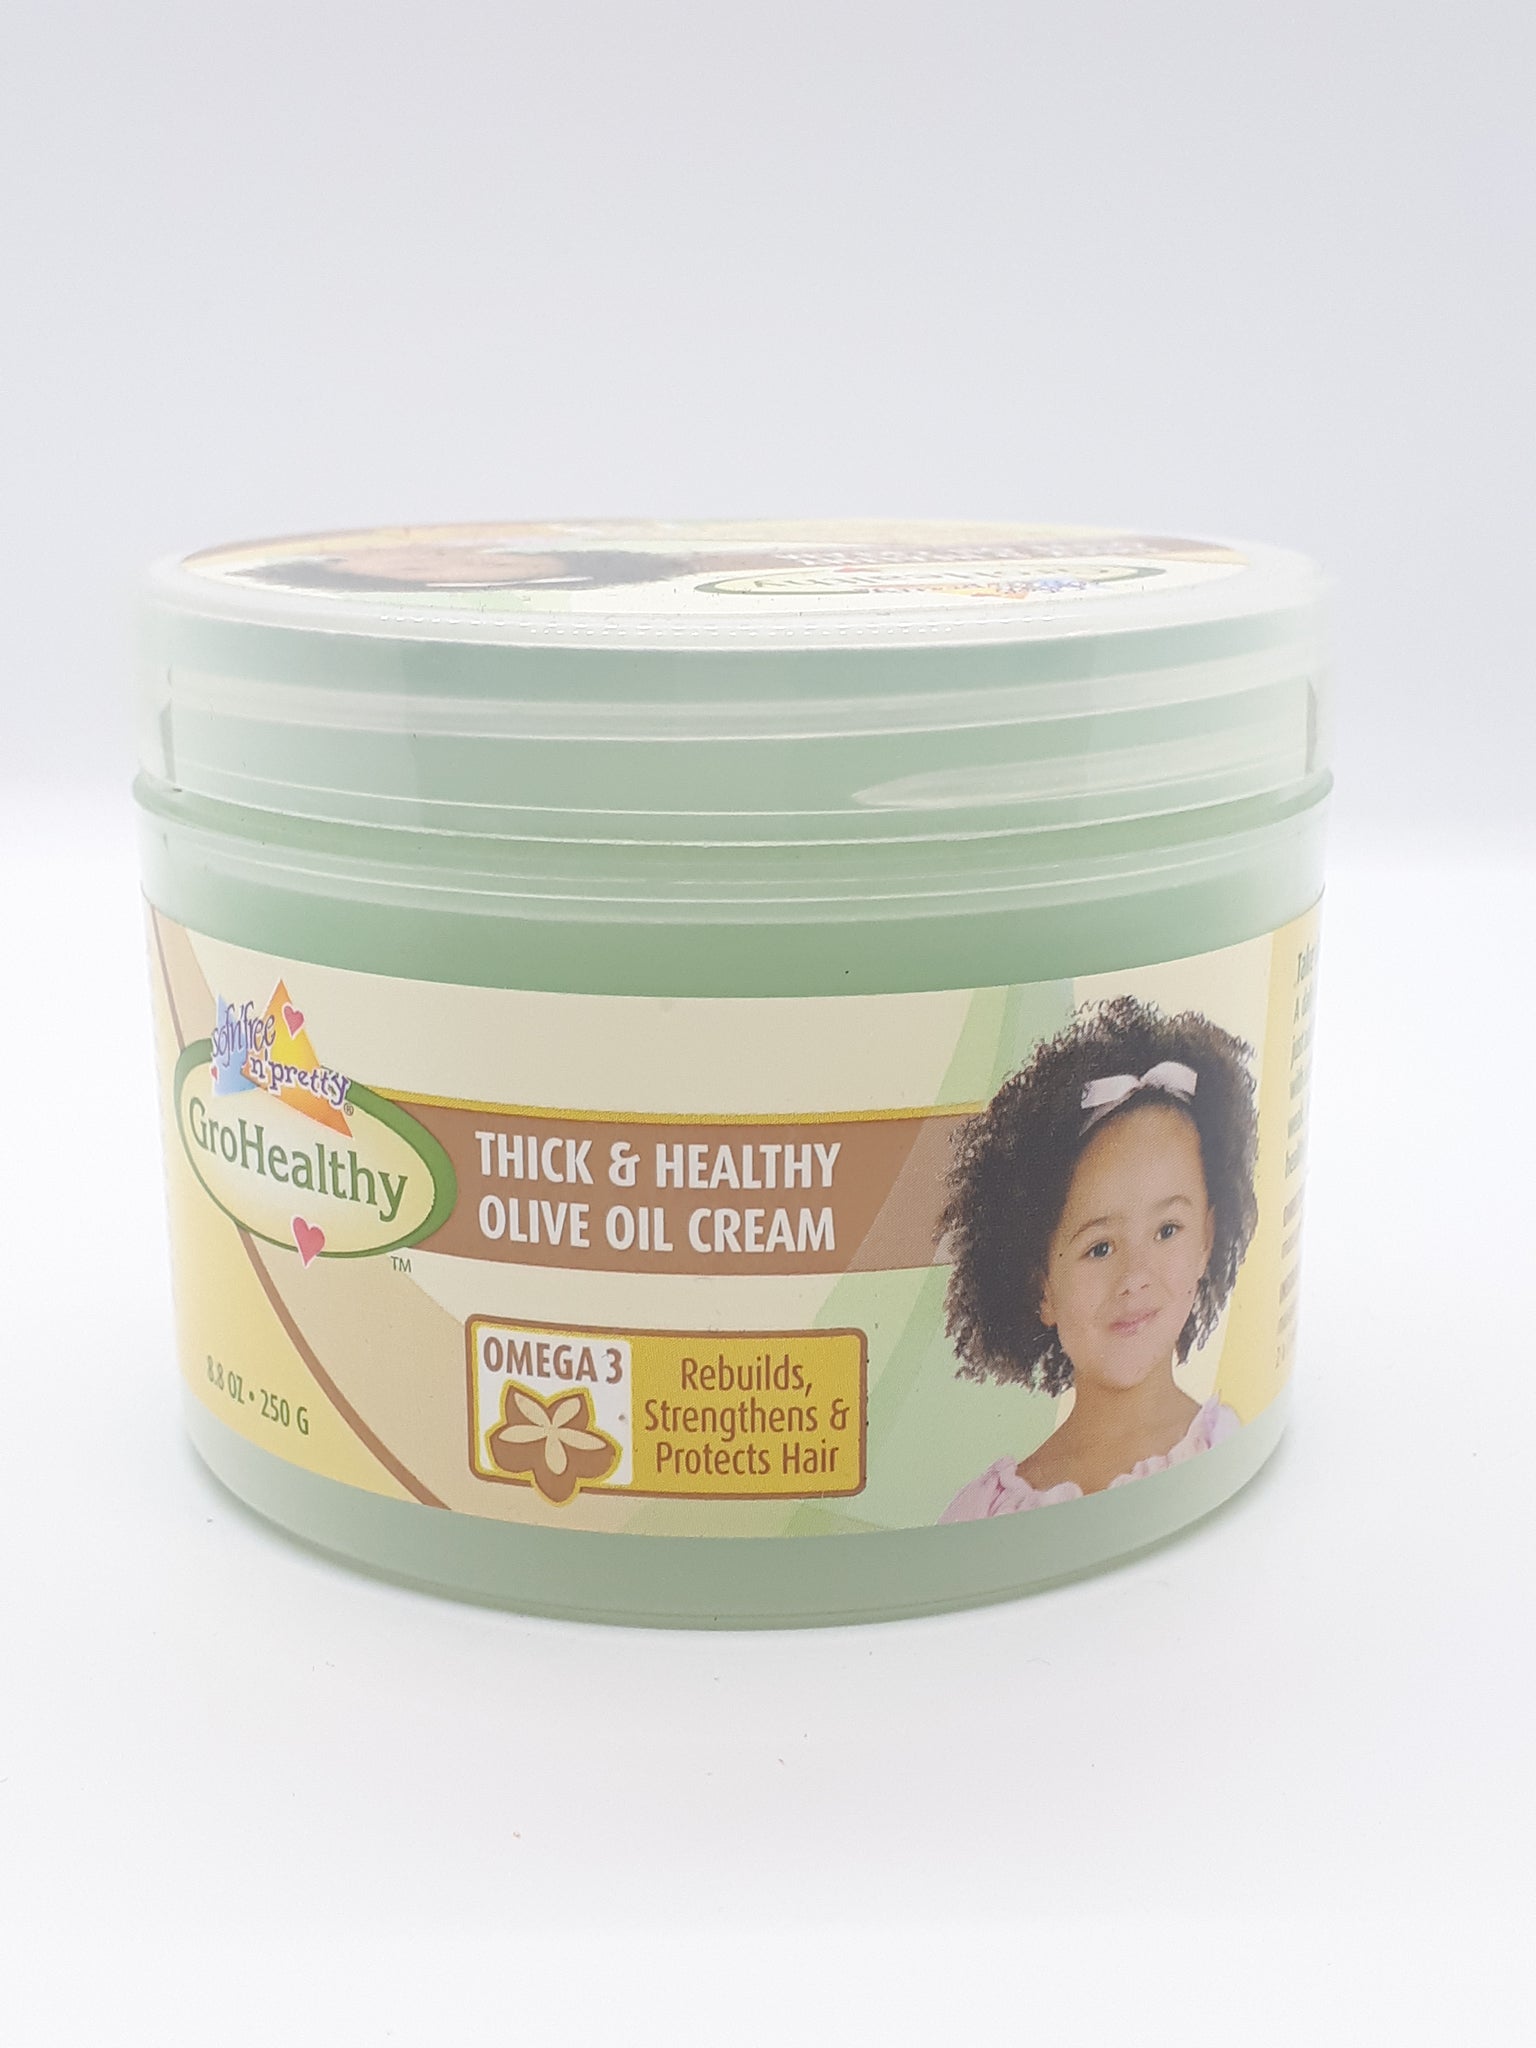 Sofn' Free n'Pretty GroHealthy Thick & Healthy Olive Oil Cream